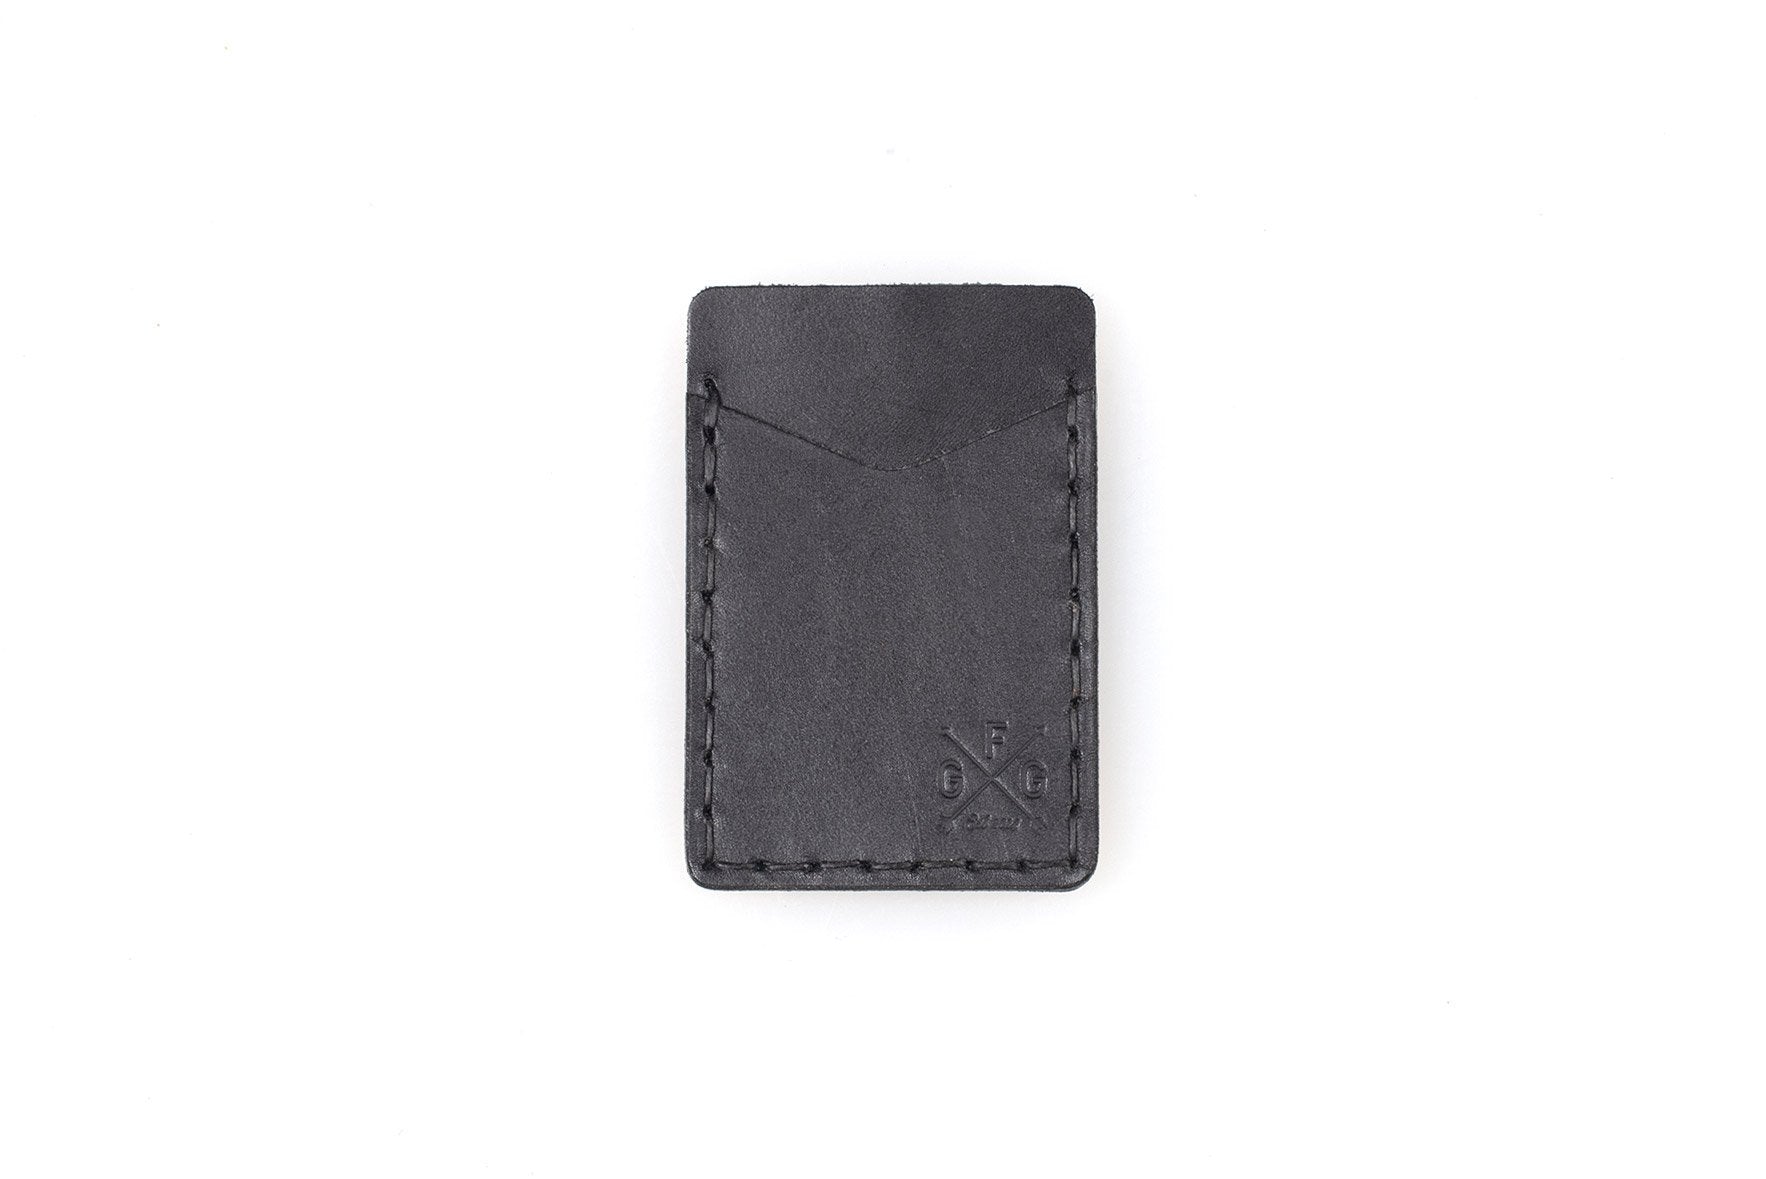 Cazoro Mens Leather Money Clip Magnet Front Pocket Wallet Slim ID Card Case